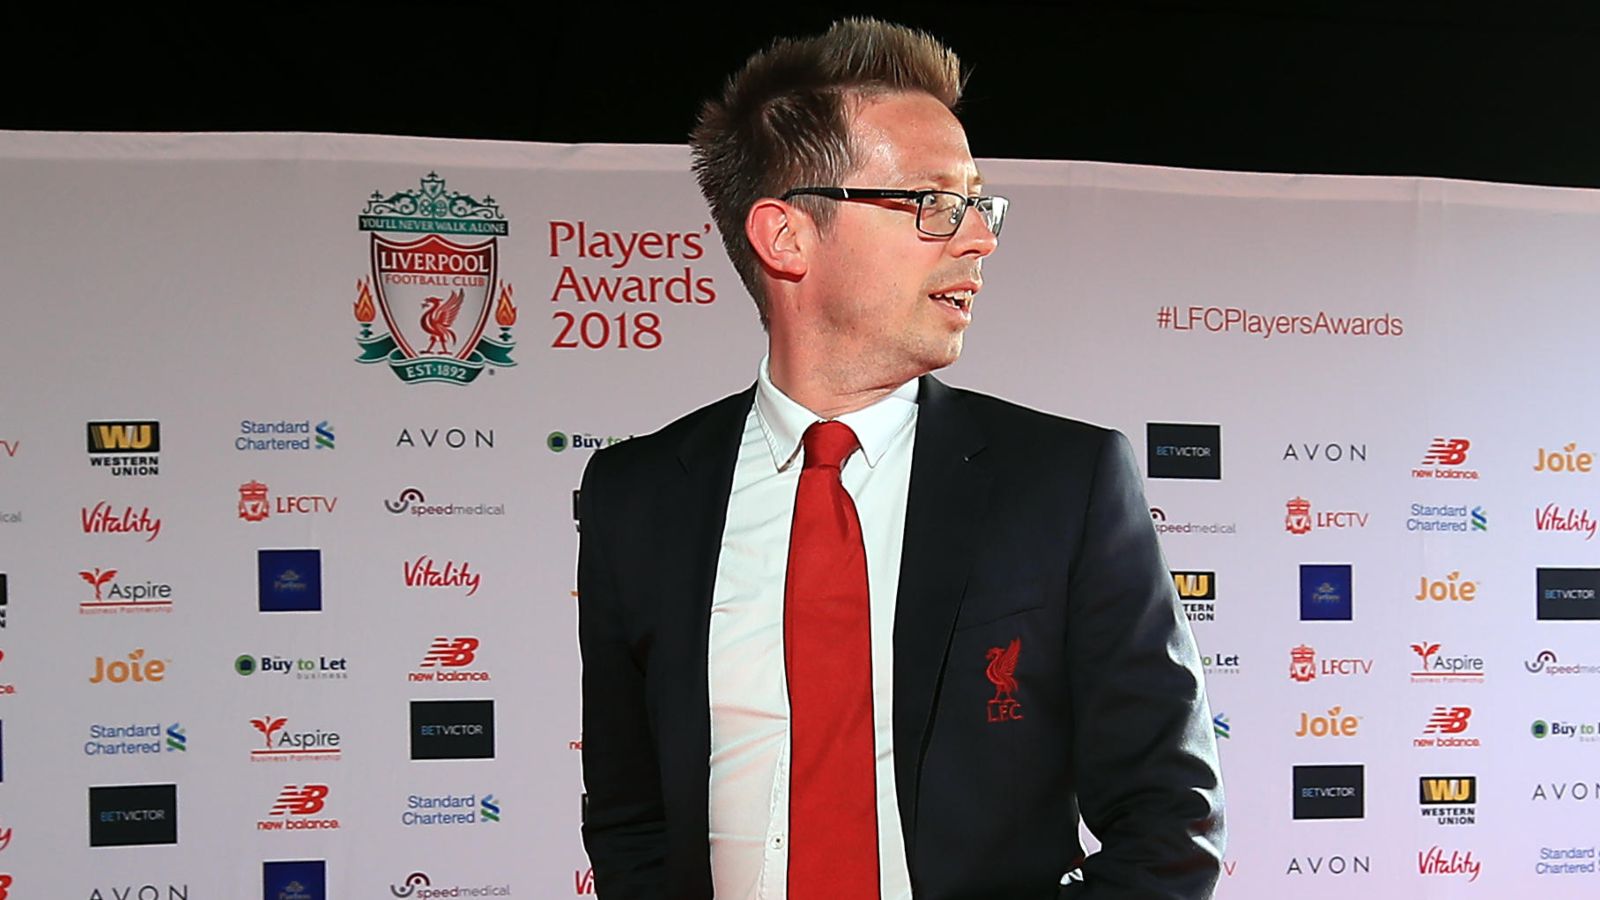 Michael Edwards to Manchester United: The former Liverpool sporting director Michael Edwards LIKELY to join Manchester United